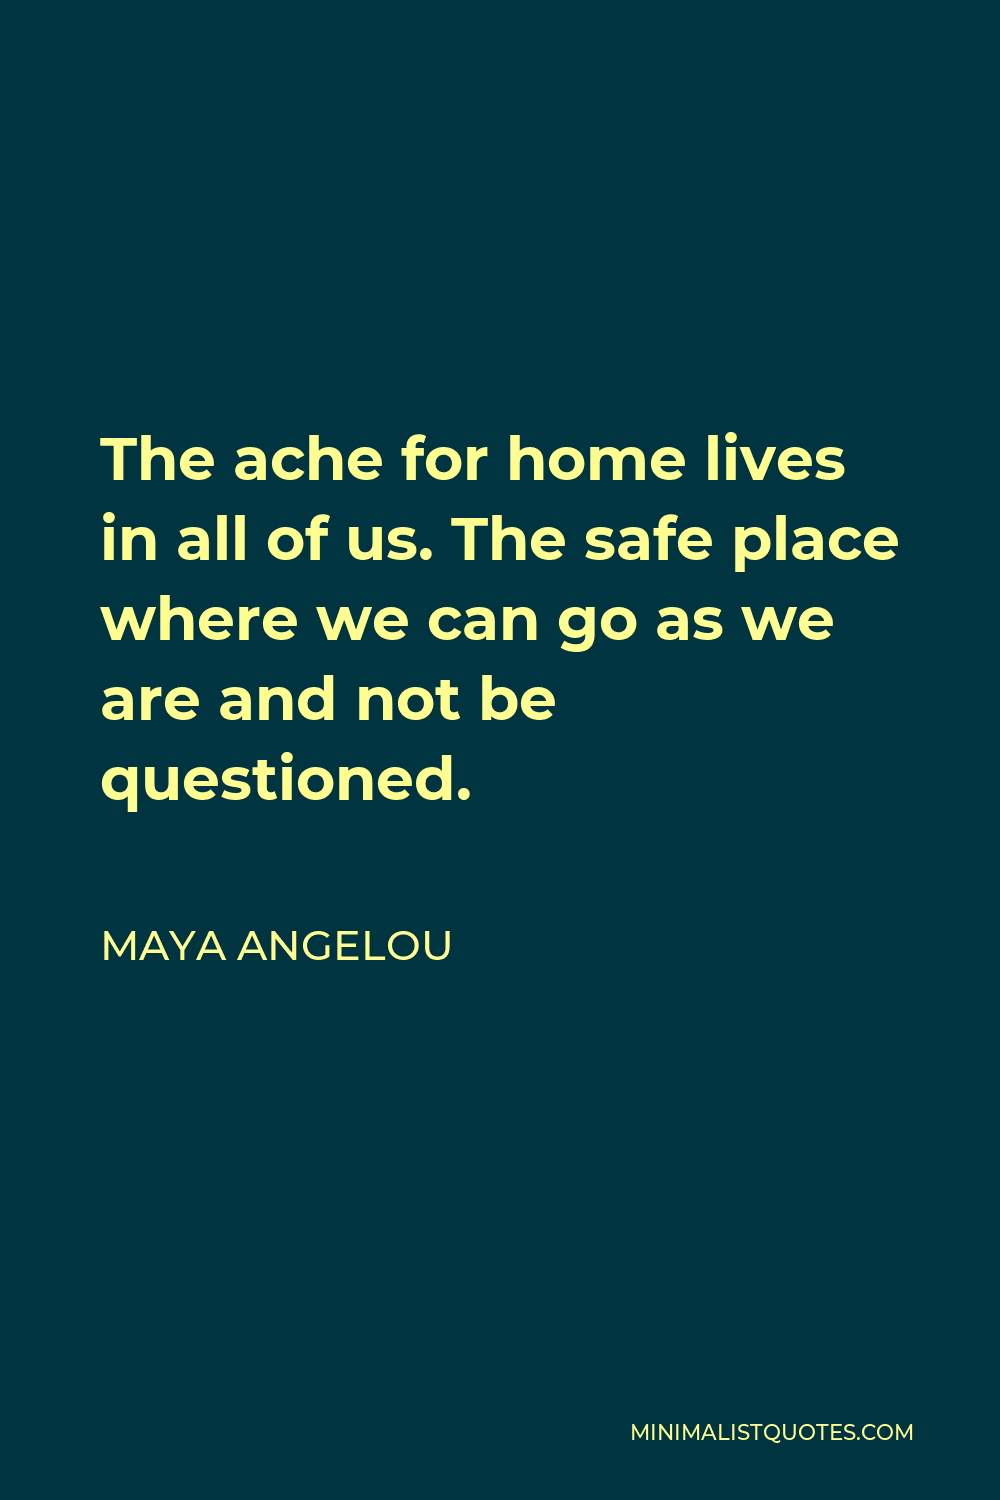 Maya Angelou Quote - The ache for home lives in all of us. The safe place where we can go as we are and not be questioned.